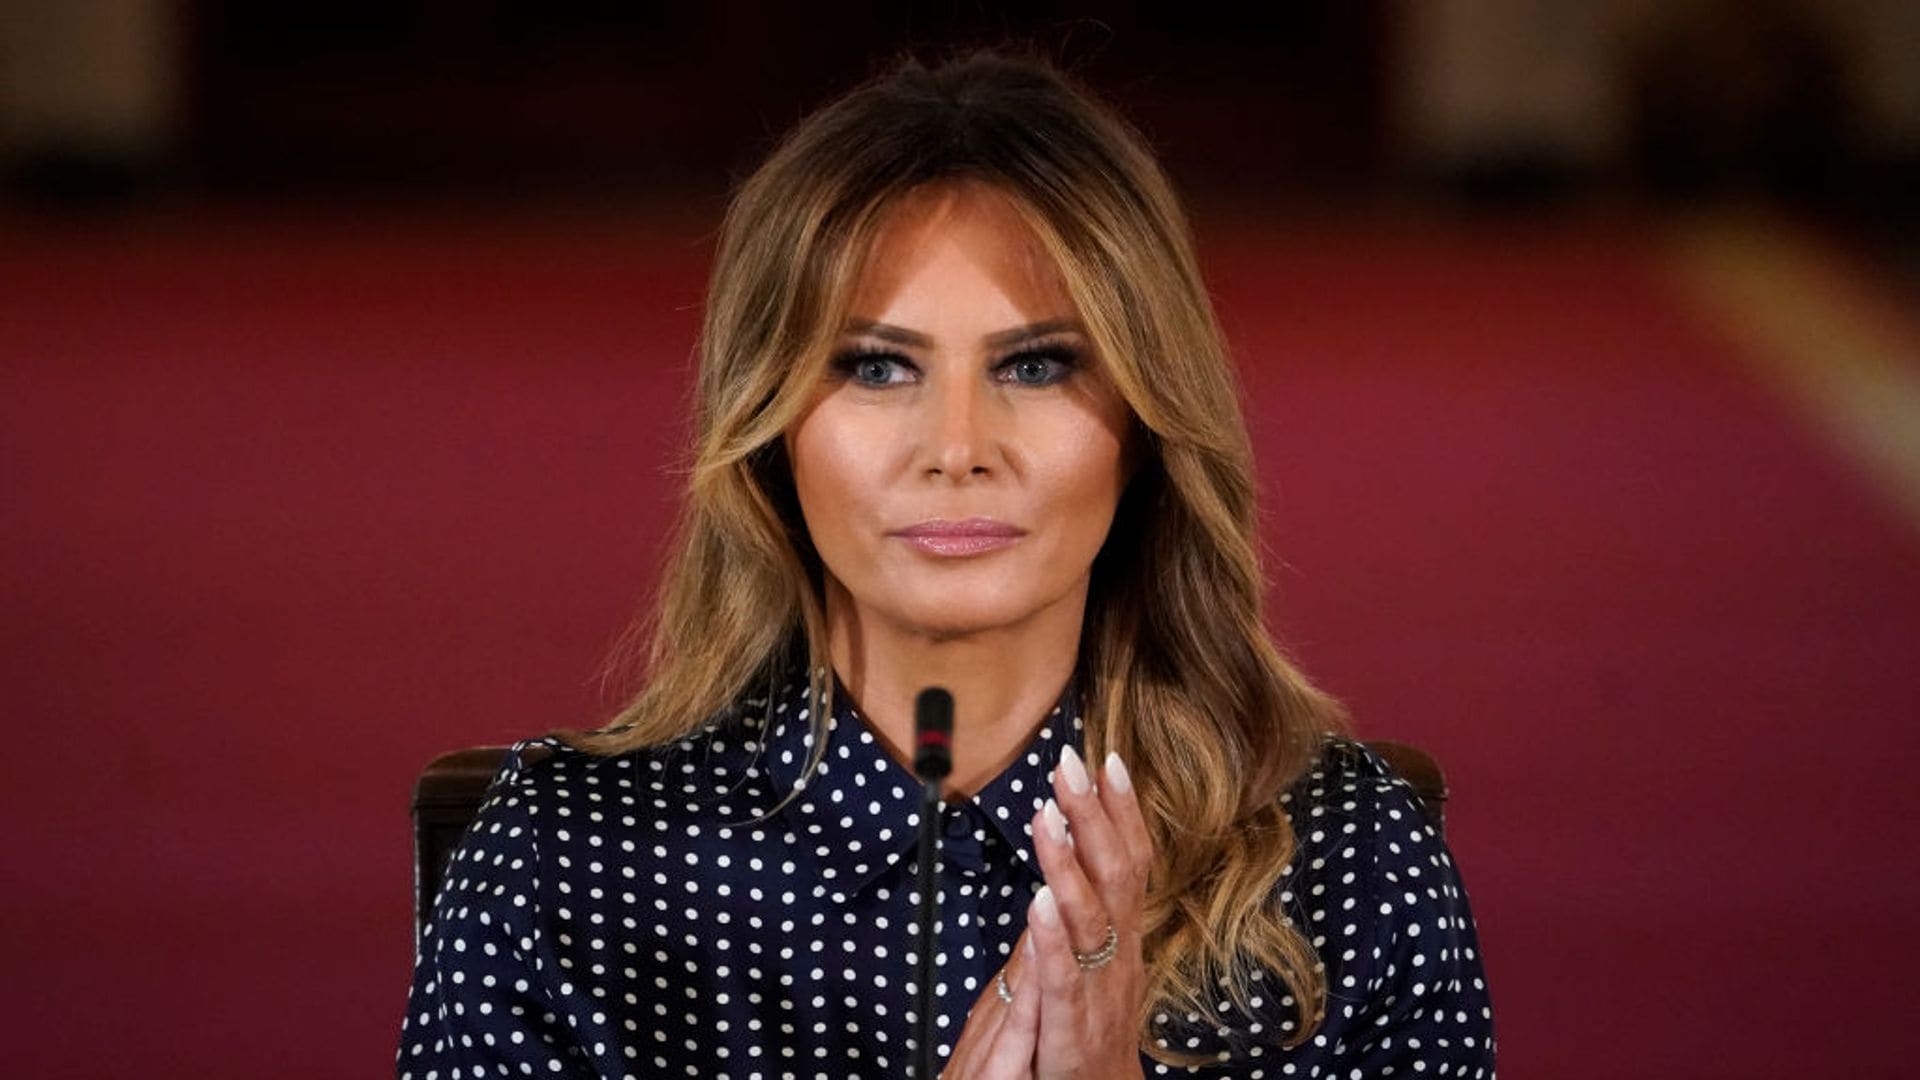 Melania Trump’s former aide criticized by former President